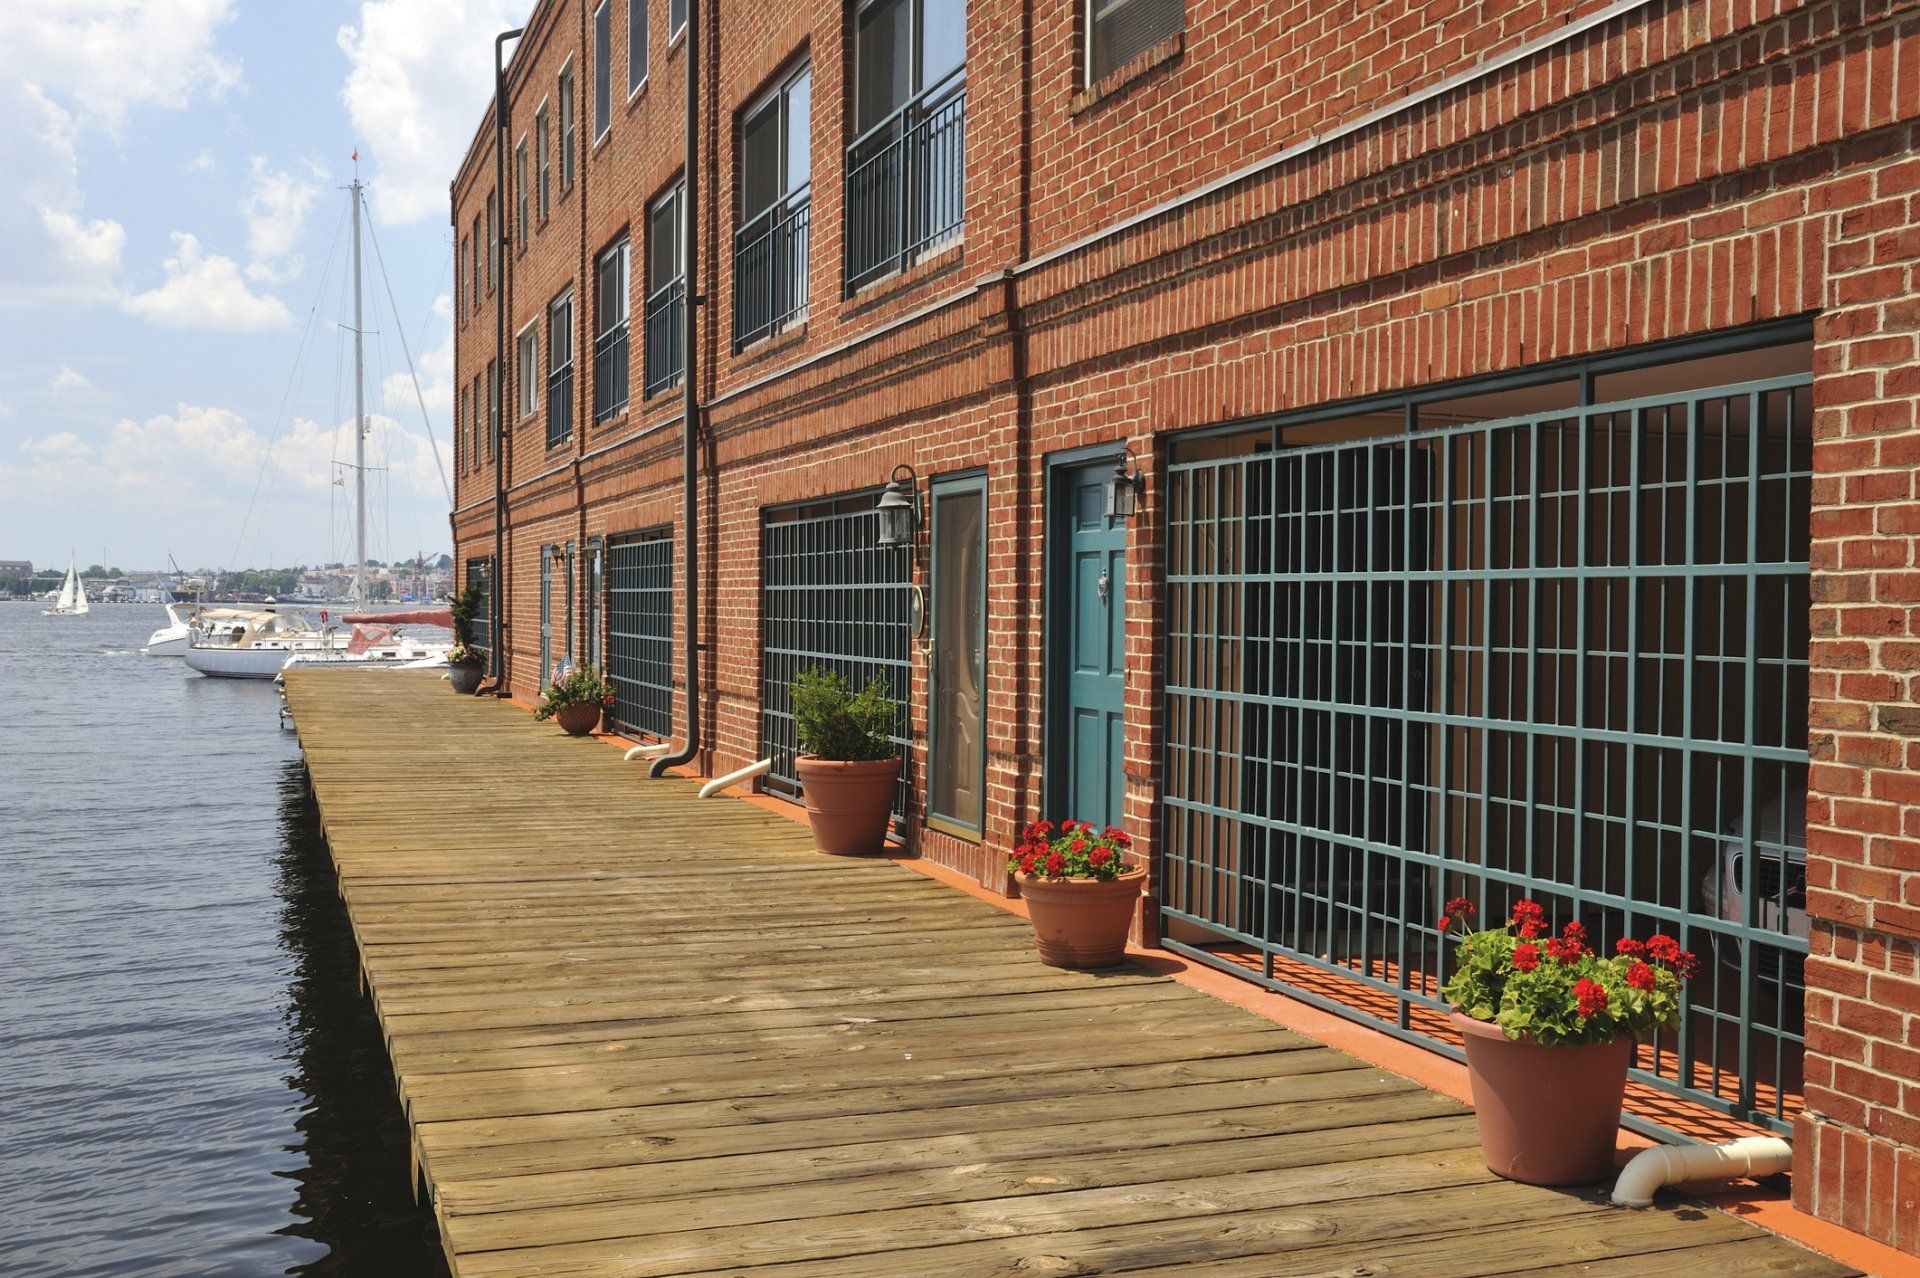 Waterfront Brick House - Baltimore, MD - Armstead Residential Services